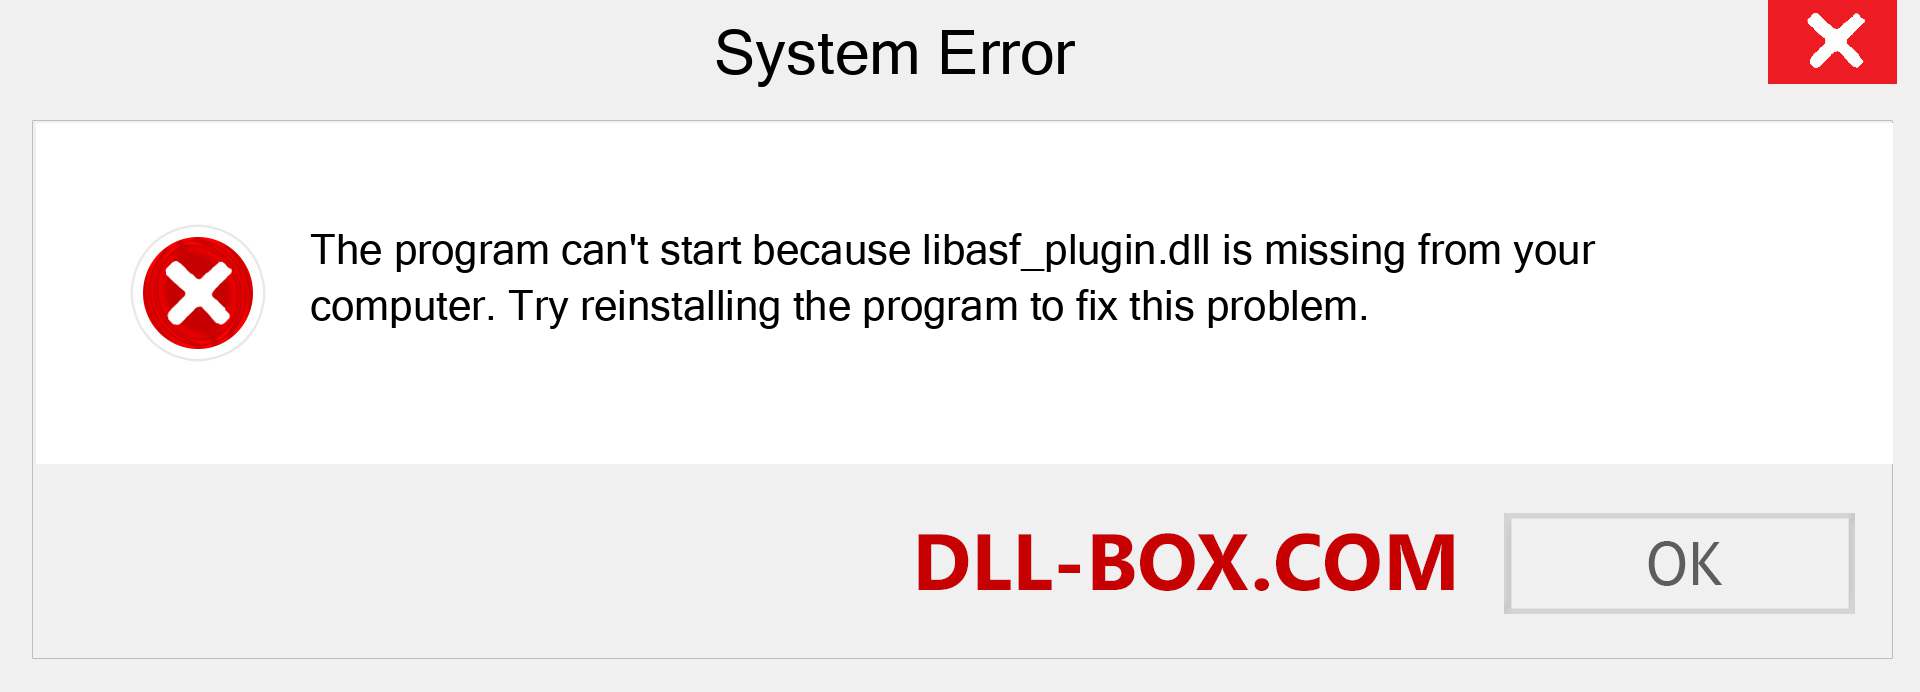  libasf_plugin.dll file is missing?. Download for Windows 7, 8, 10 - Fix  libasf_plugin dll Missing Error on Windows, photos, images